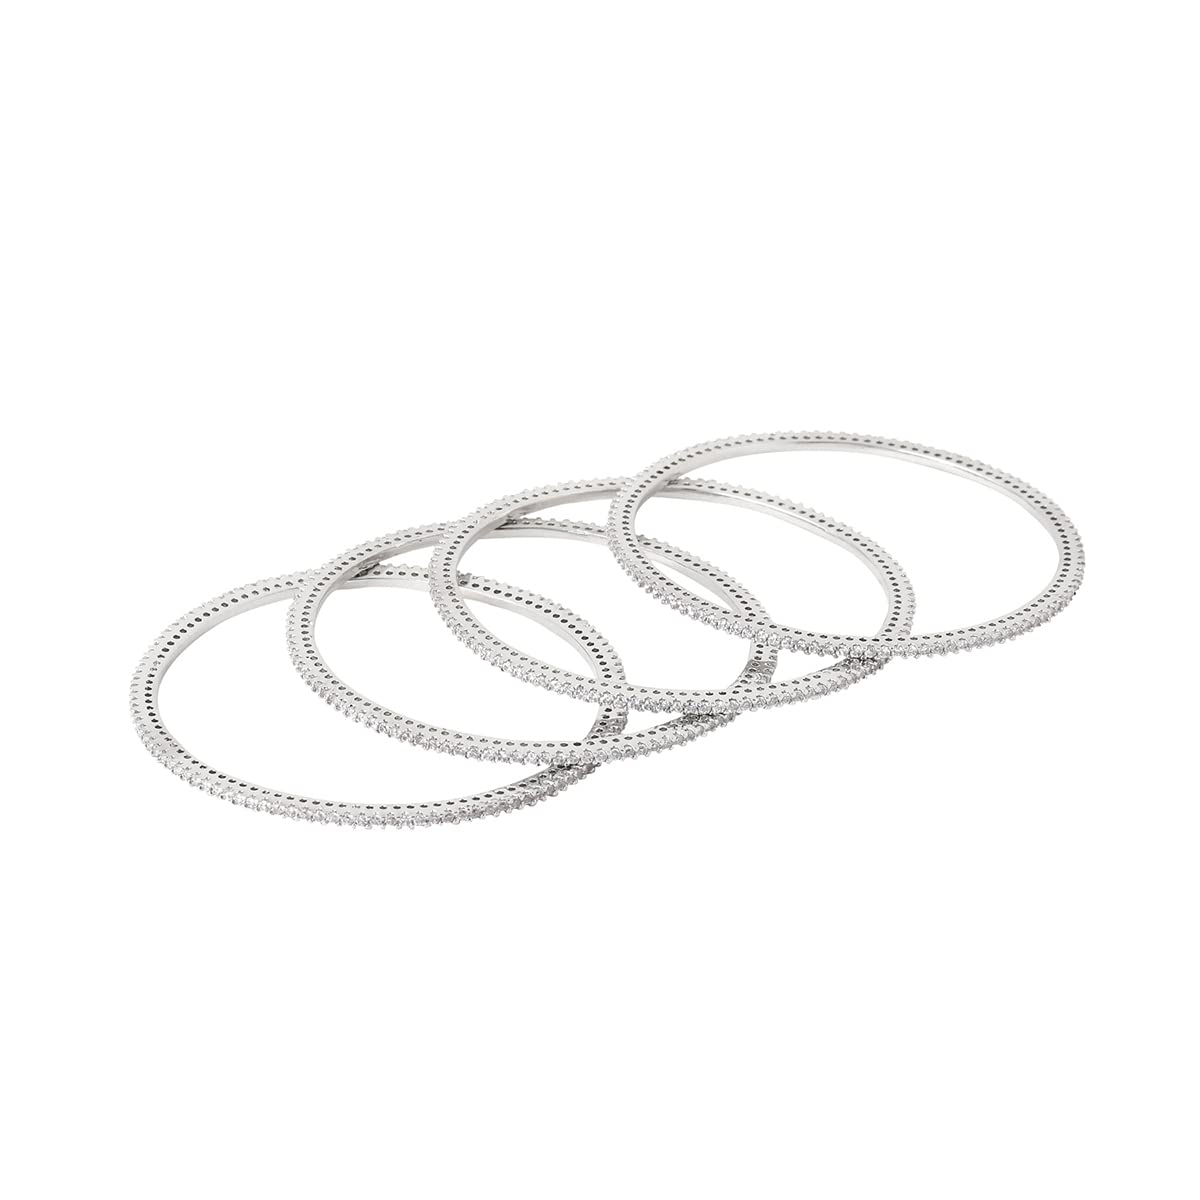 Drawing Of Various Rings Arranged In A Circle Outline Sketch Vector Bangles  Drawing Bangles Outline Bangles Sketch PNG and Vector with Transparent  Background for Free Download